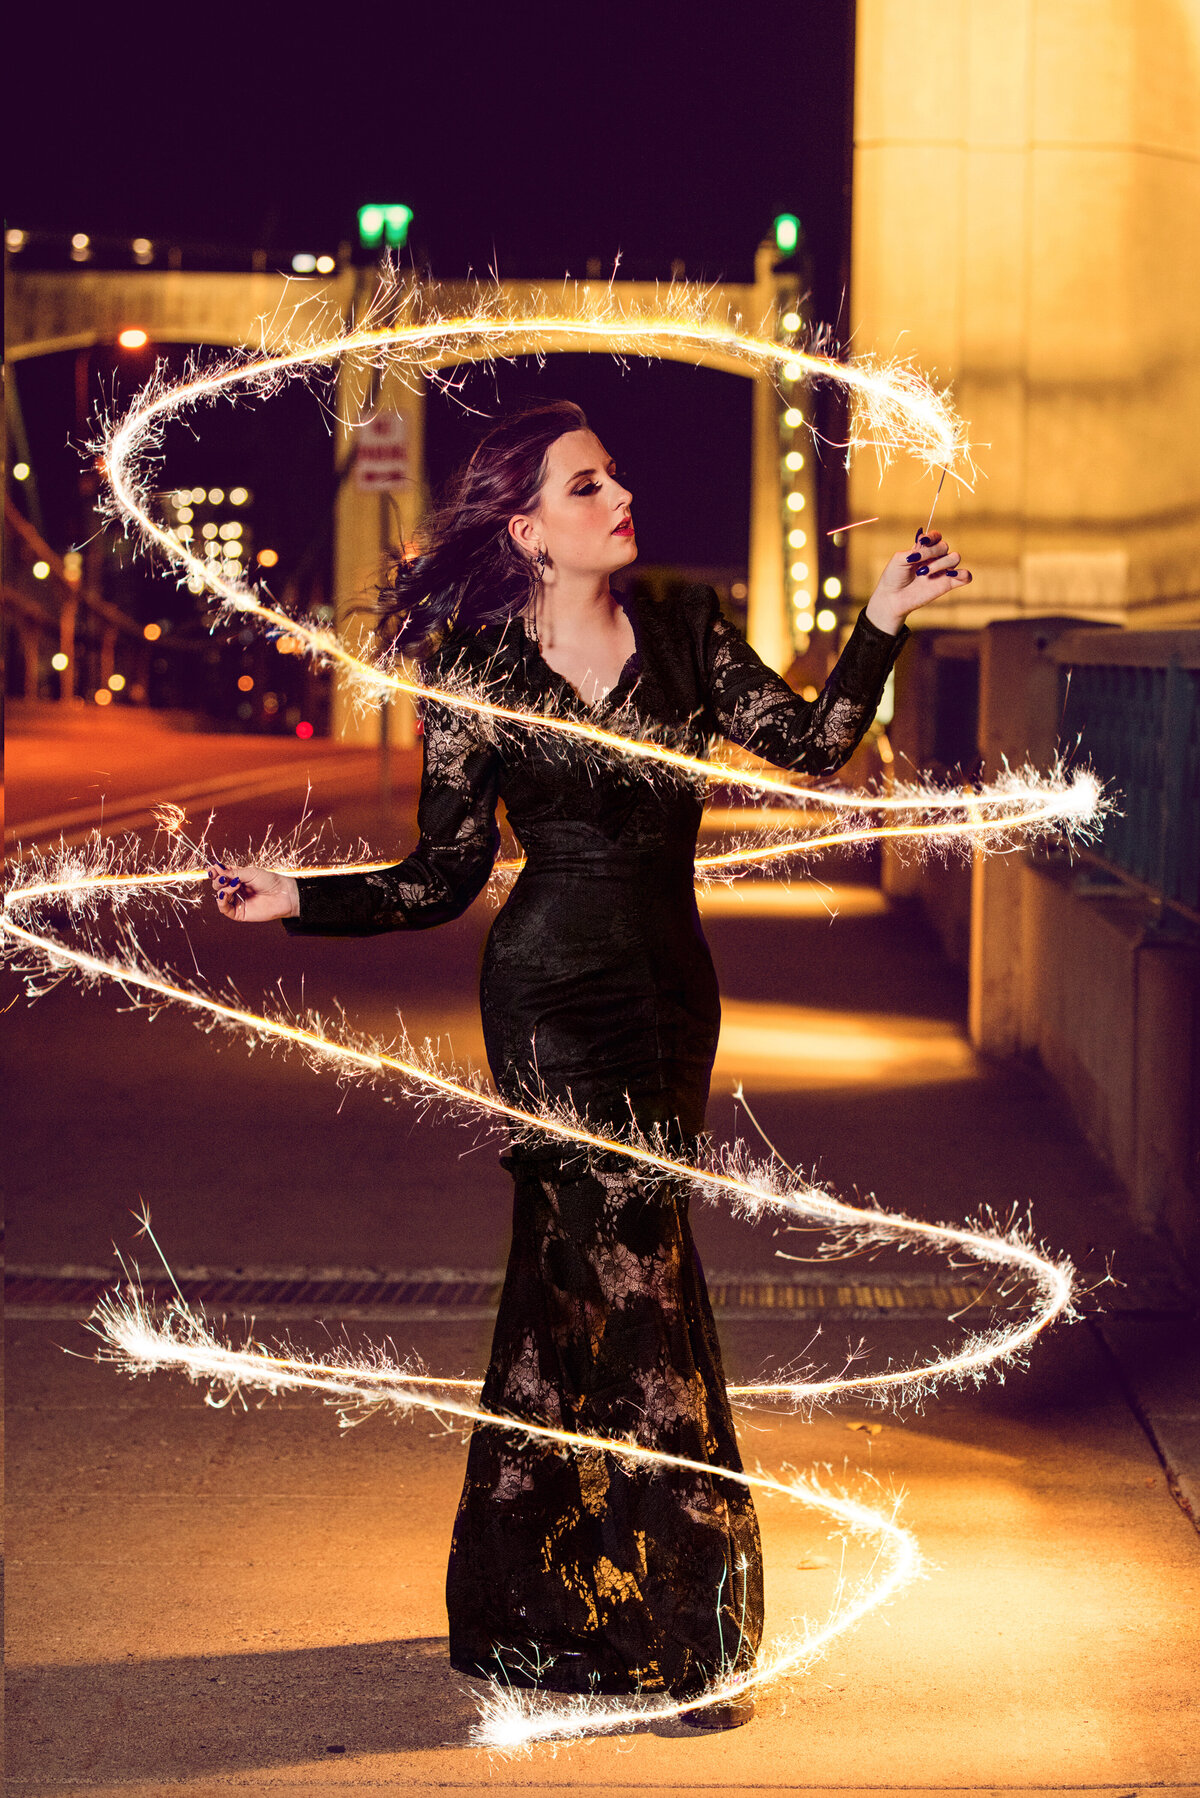 senior photo of girl in black lace dress on bridge at night with sparklers